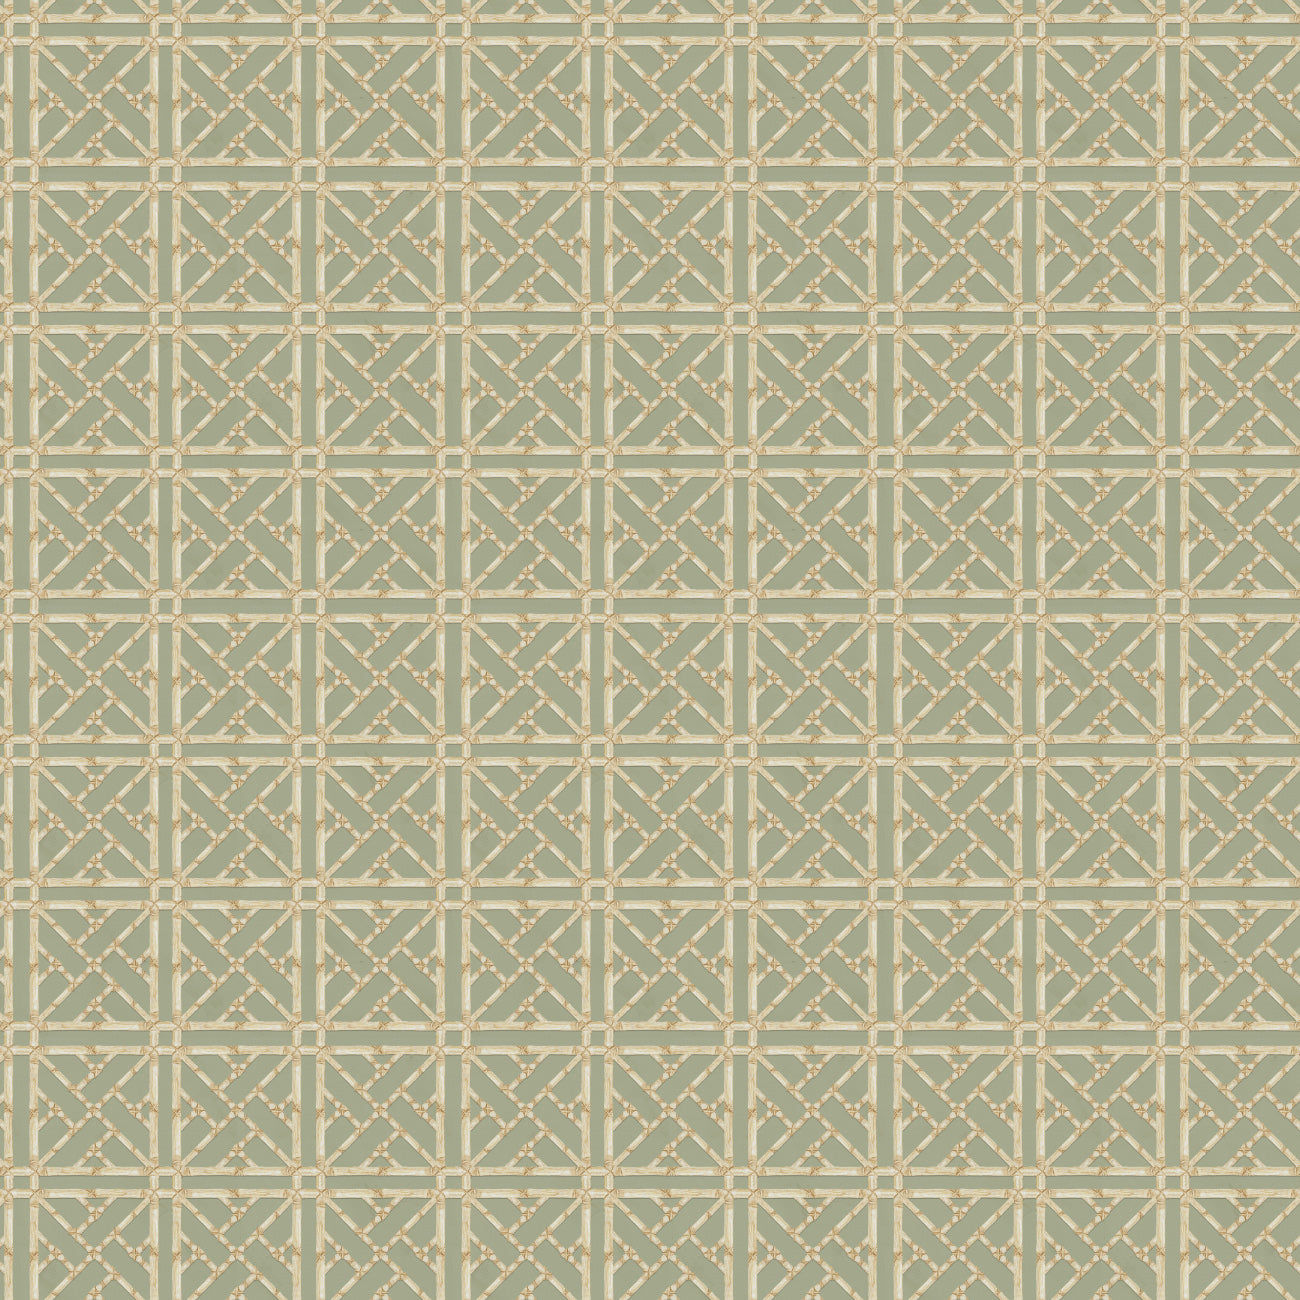 Bloom Tapestry Collection-Canopy Trellis-Light Sage-100% Cotton 55230805-03